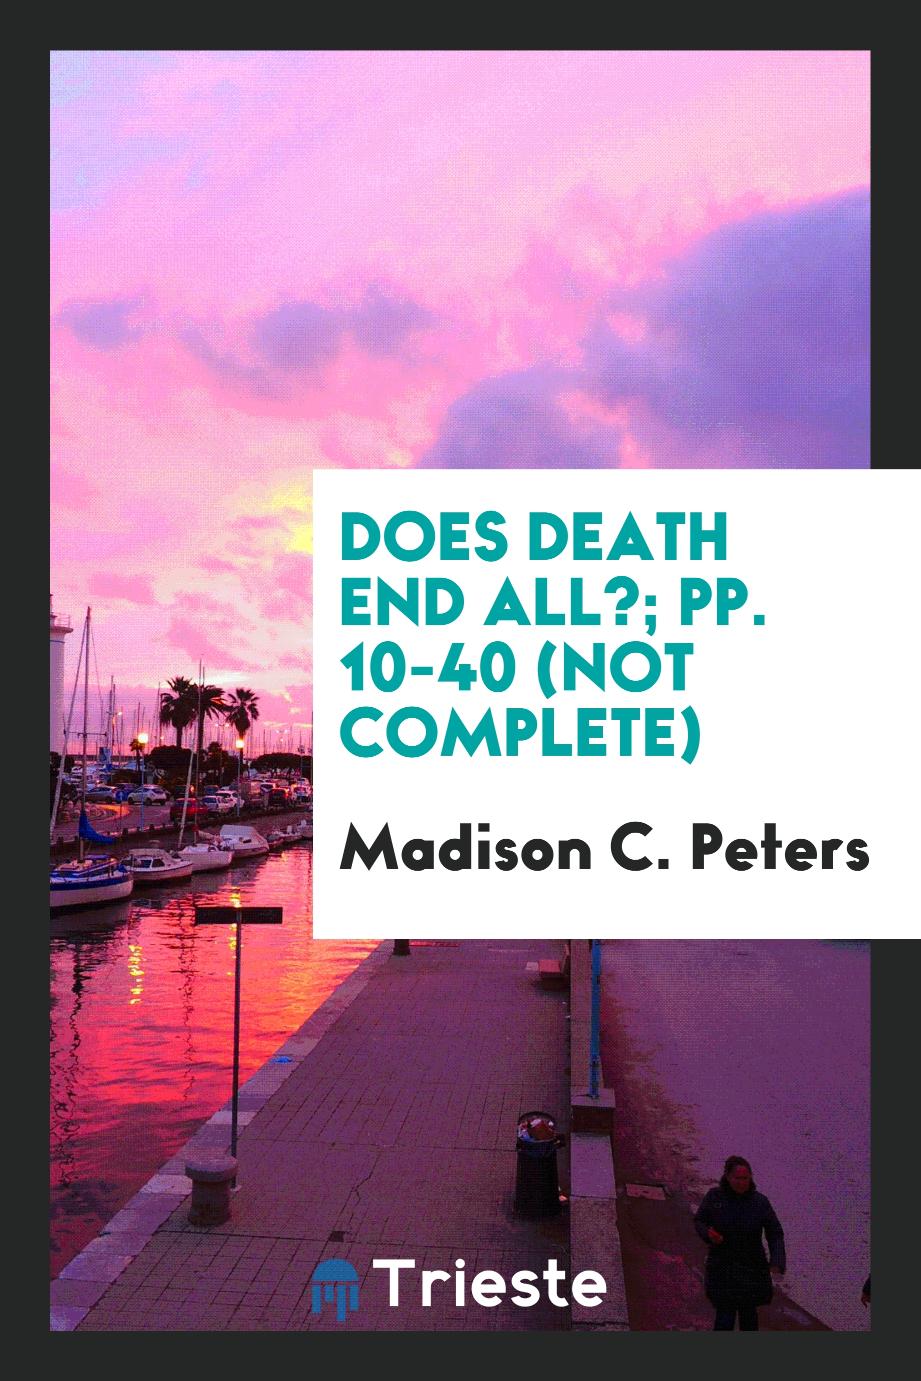 Does Death End All?; pp. 10-40 (not complete)